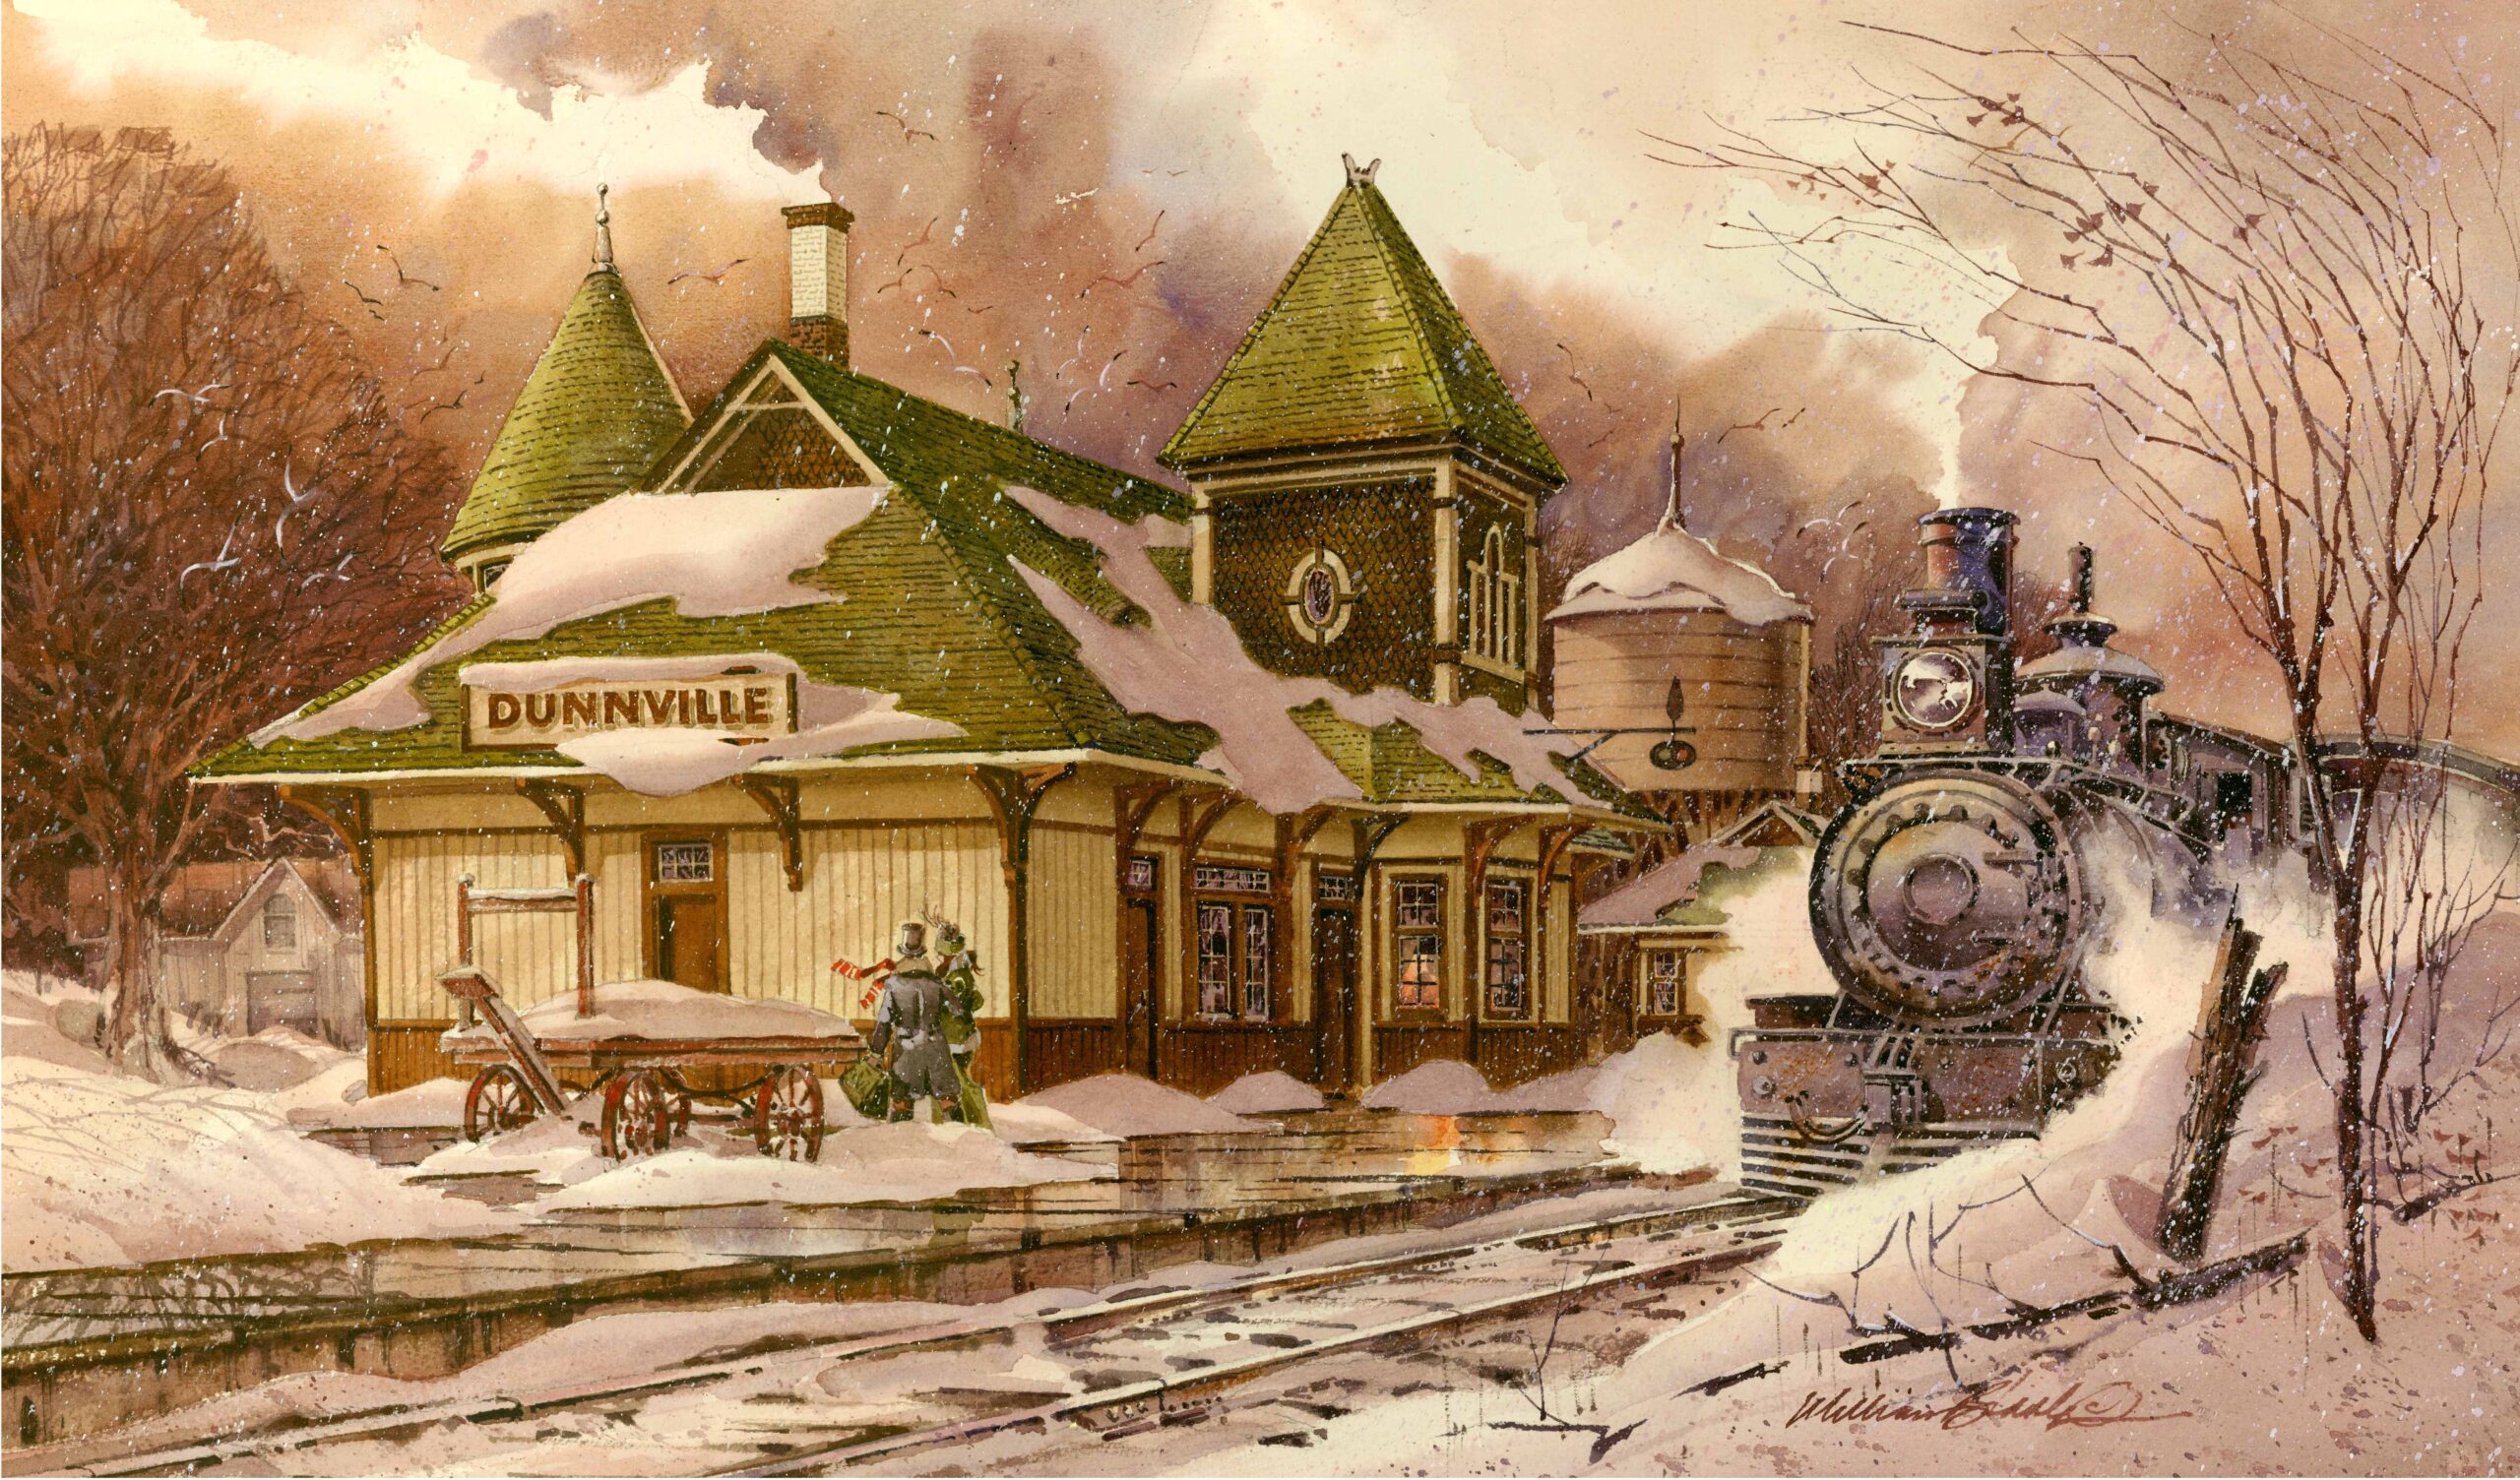 WB – Dunnville Train Station © William Biddle